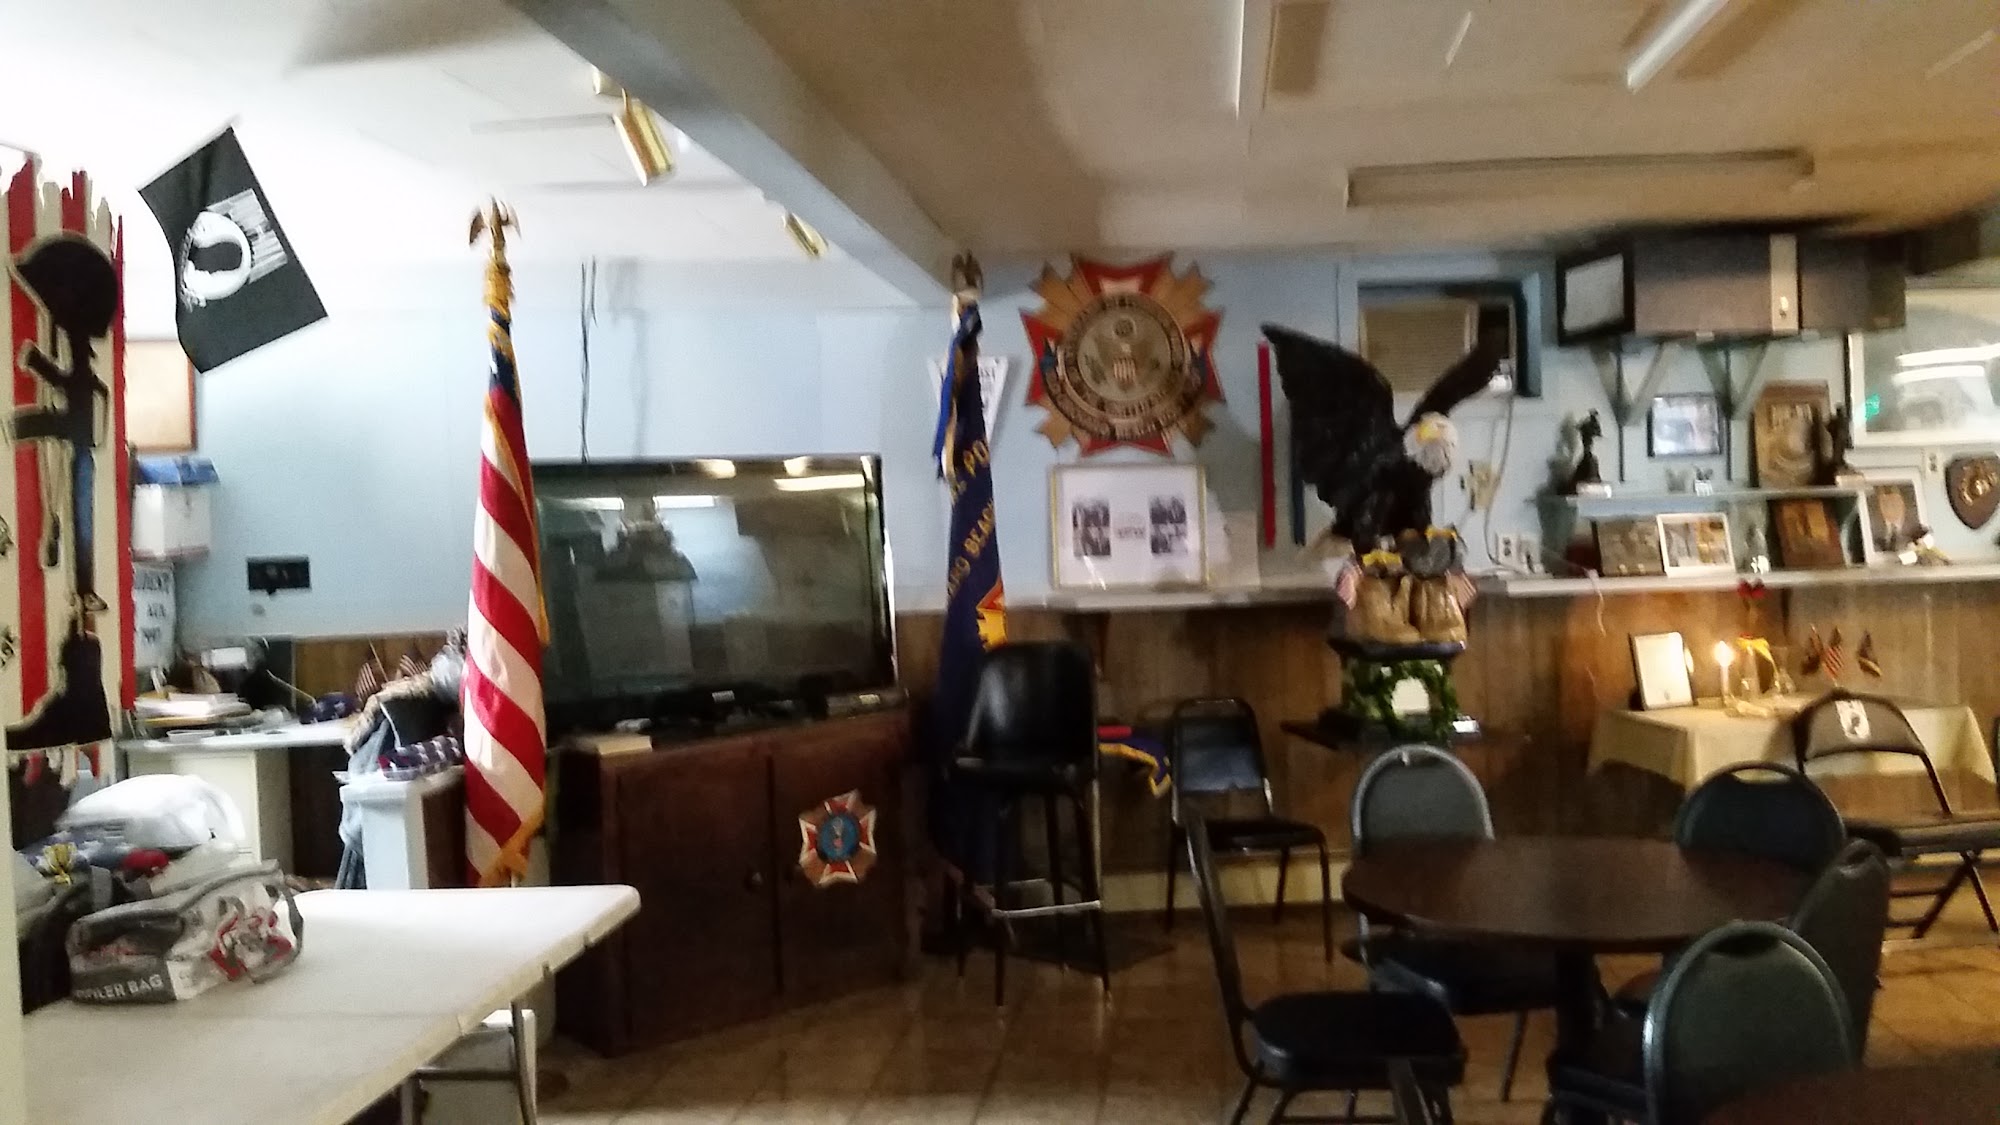 VFW Post 7997 76 Atlantic Ave, Old Orchard Beach Maine 04064